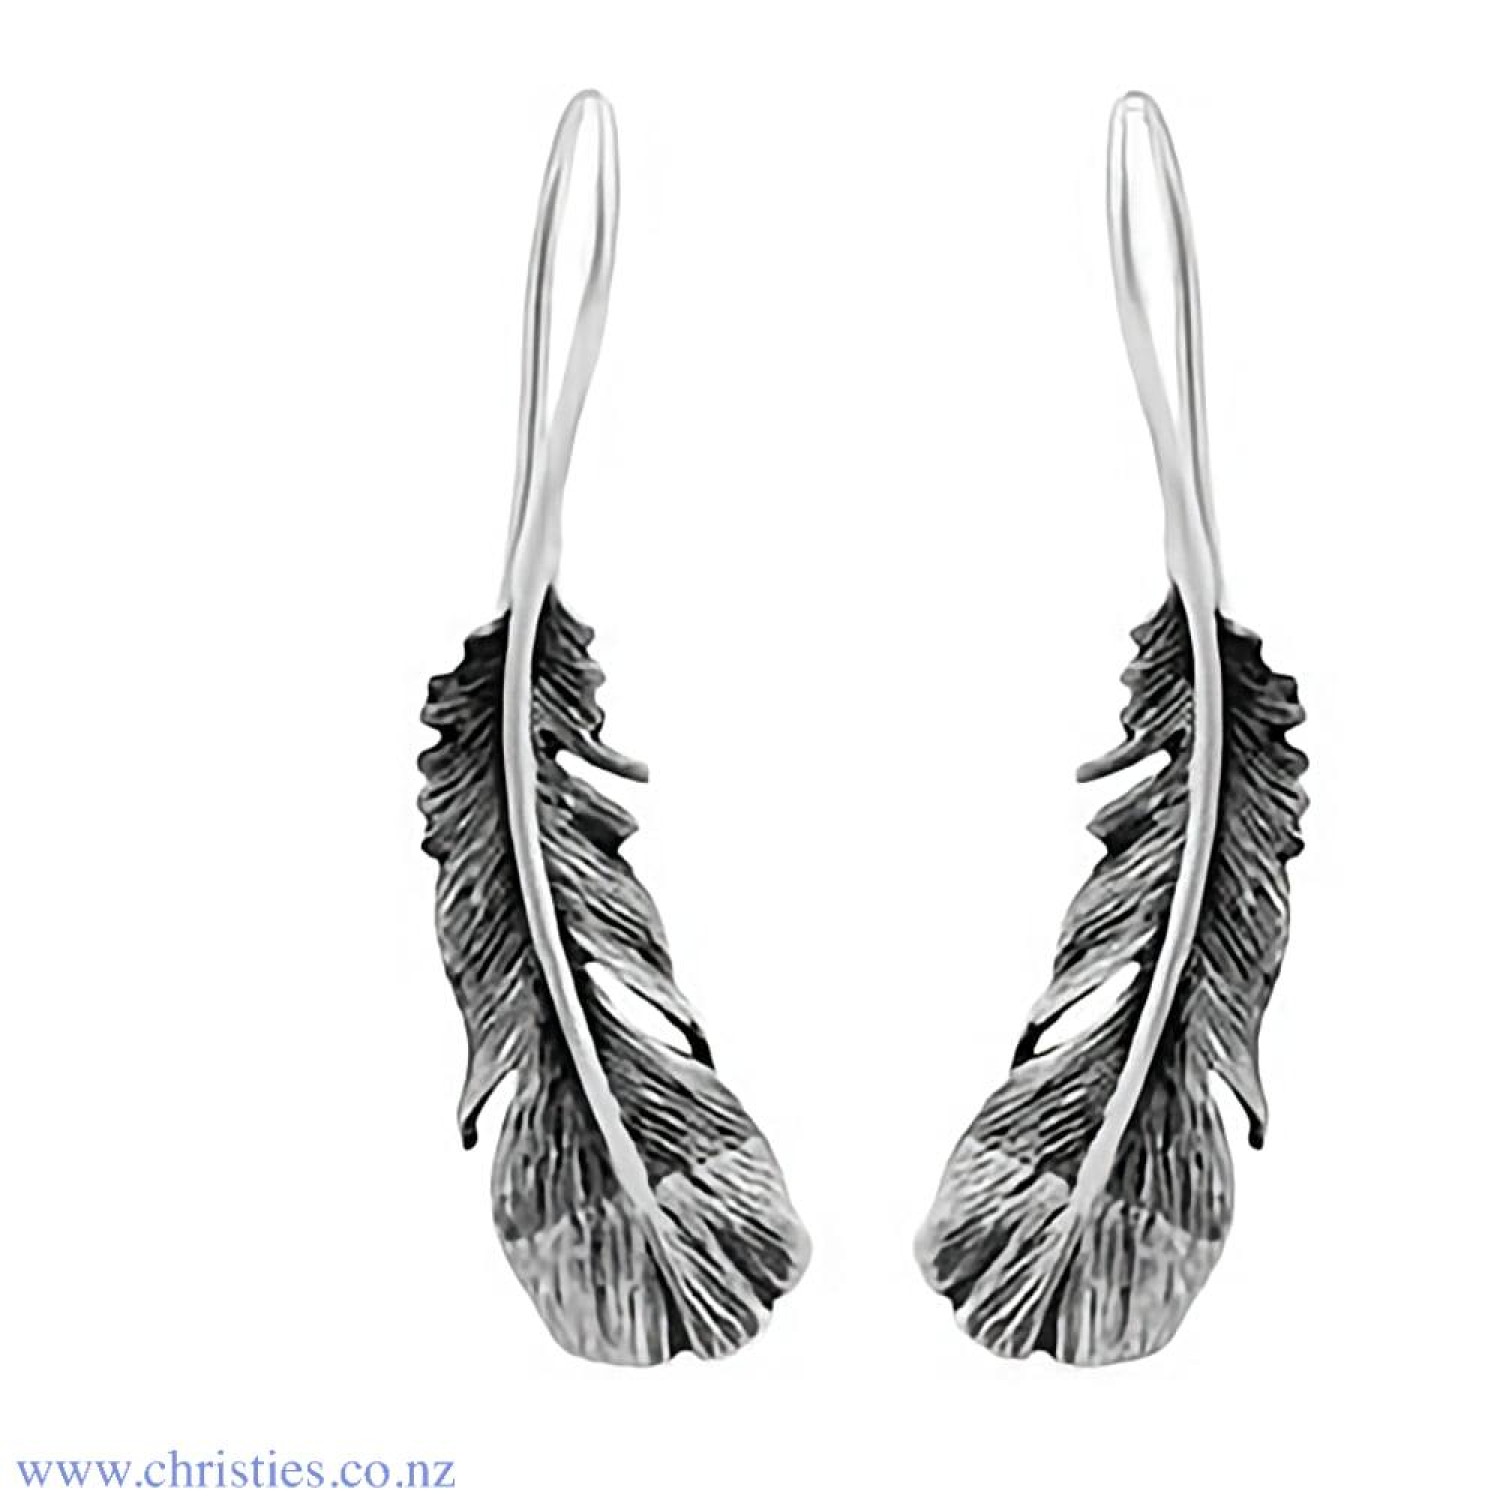 2E61004 Evolve NZ Huia Drop Earrings. Evolves stunning Huia feather earrings honour those special people whom we greatly respect, admire and treasure. The wearing or gifting of these beautiful feathers celebrates all that is precious to us. Sterling si @c